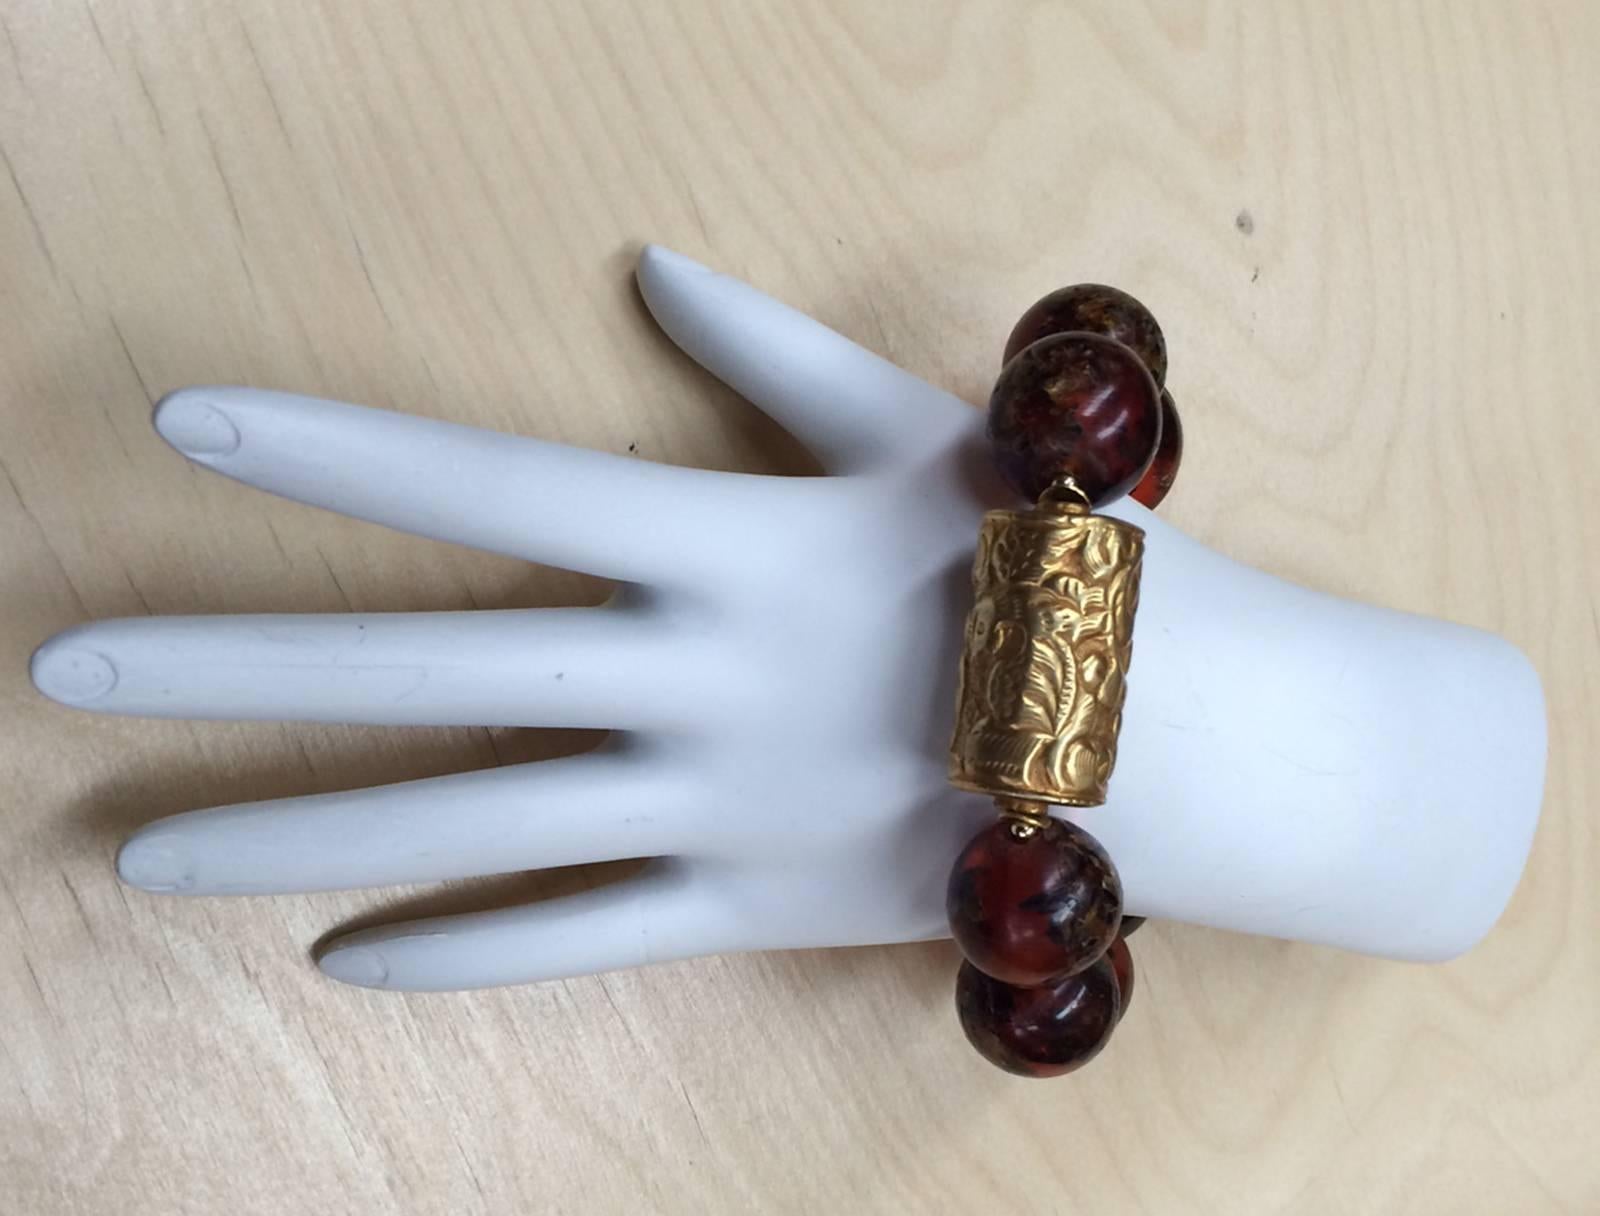 Rare Large Tibetan Natural Copal Amber and Embossed Gilt beads Bracelet...Beautiful in its simplicity! Expandable to fit small-average and plus wrists; 9 amber beads, each approx. 19mm-20mm; accented with gilt S/S spacers, centered by a large